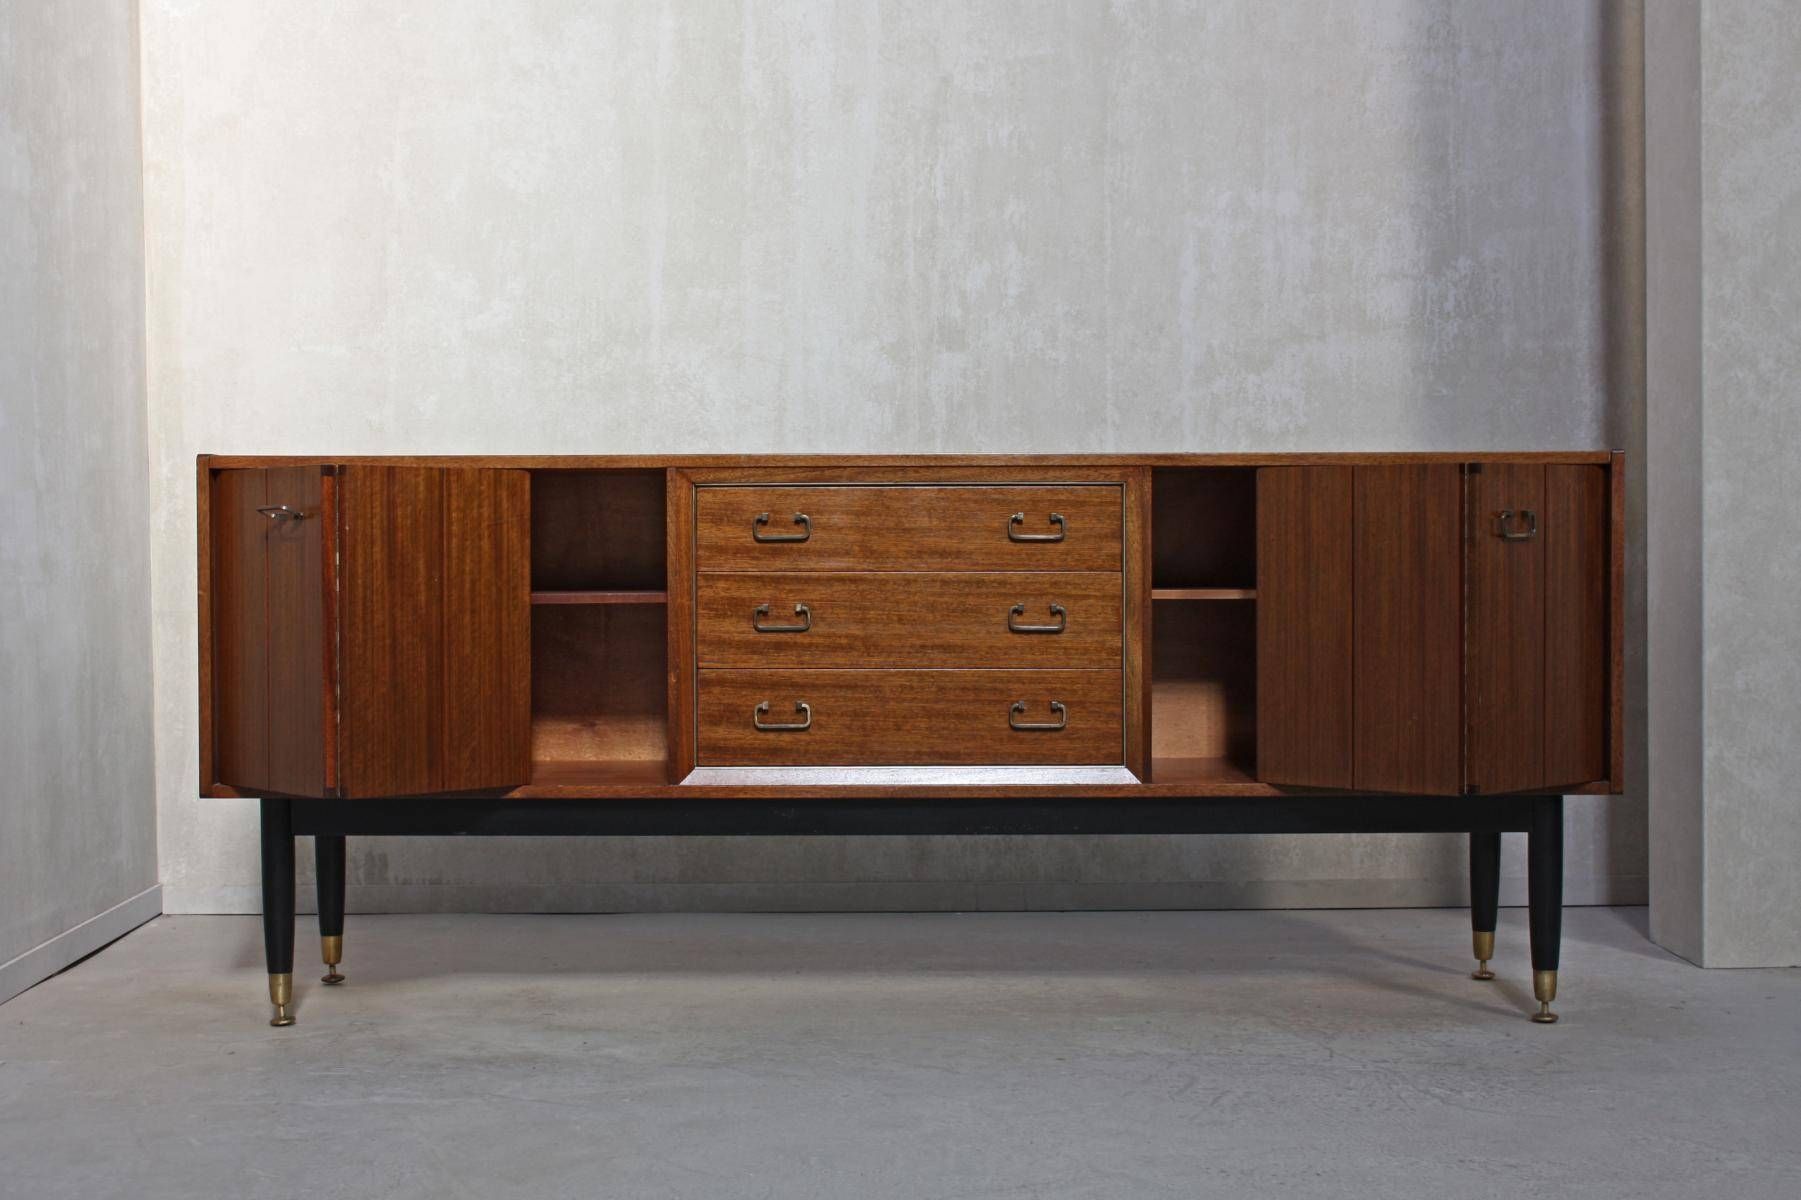 Vintage Sideboard From G Plan, 1950s For Sale At Pamono Intended For Newest G Plan Vintage Sideboards (View 4 of 15)